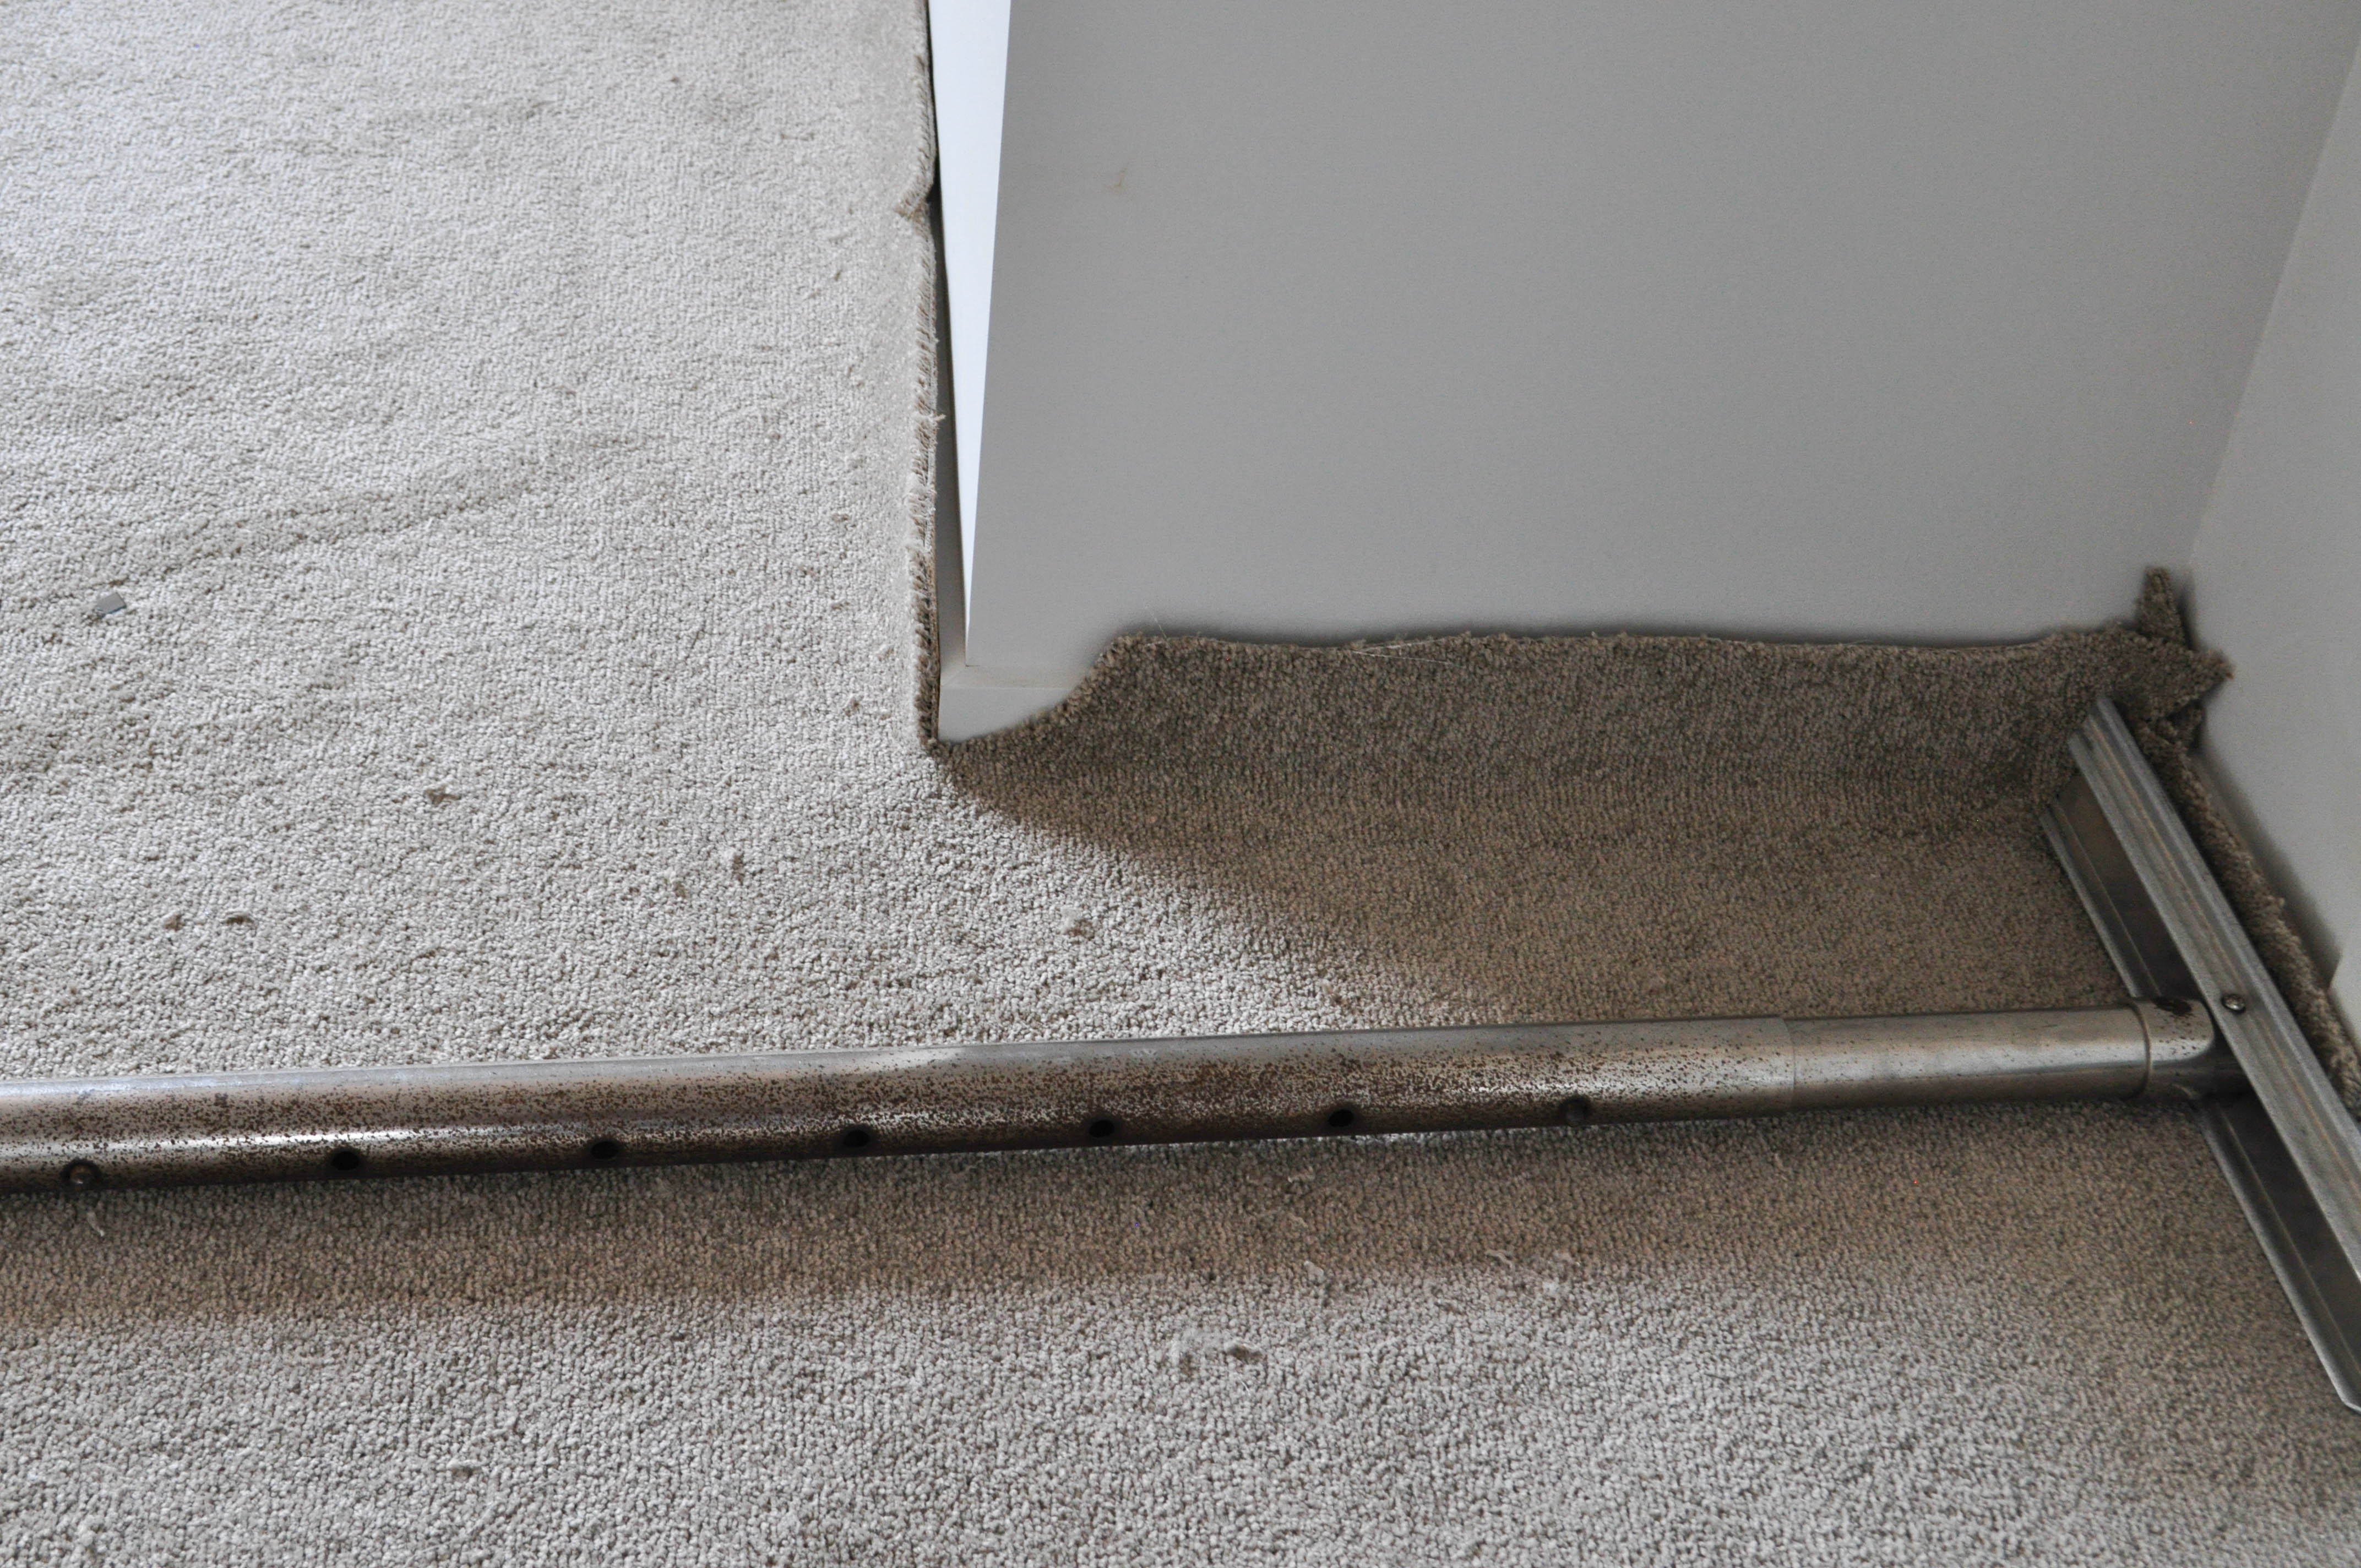 a slab of carpet with ripples in it, in a room that has been lifted of the gripper, with the foot of the power stretcher on the carpet
adjoining the wall and pressing on the carpet to impale it onto the gripper spikes where it will remain permanently.